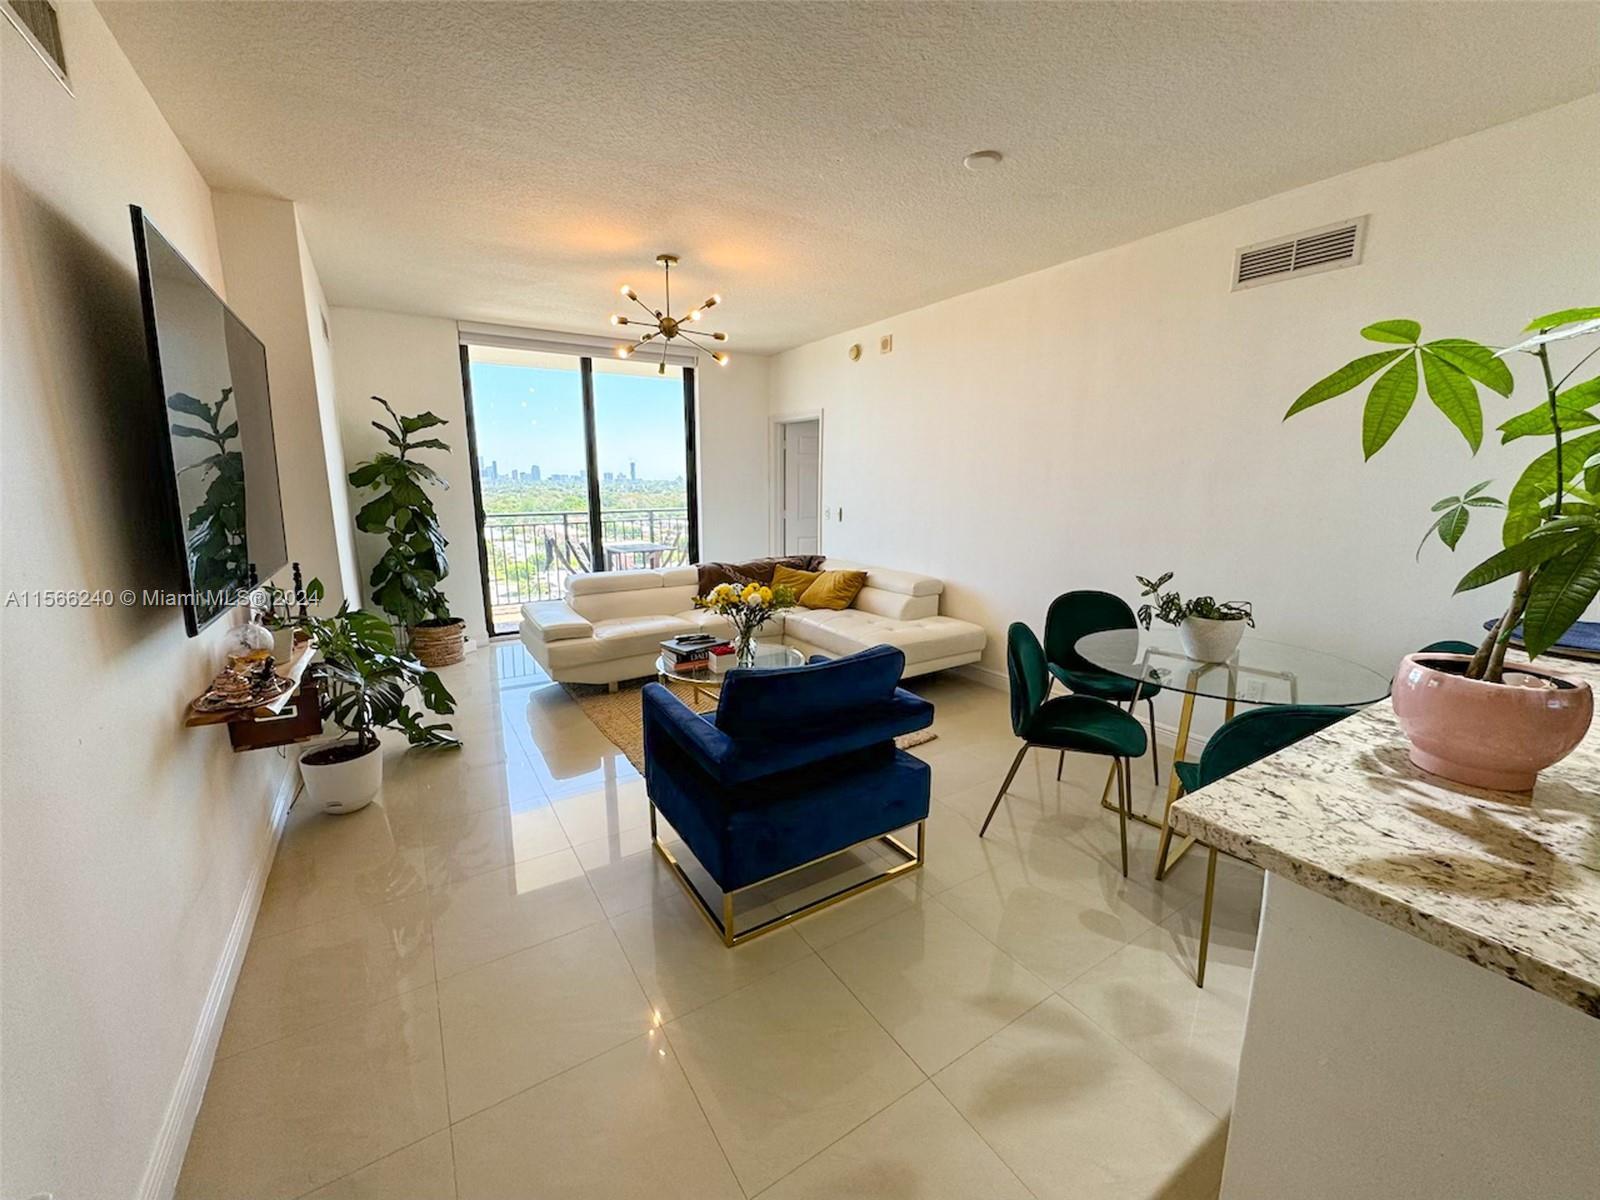 Photo of 888 S Douglas Rd #1102 in Coral Gables, FL